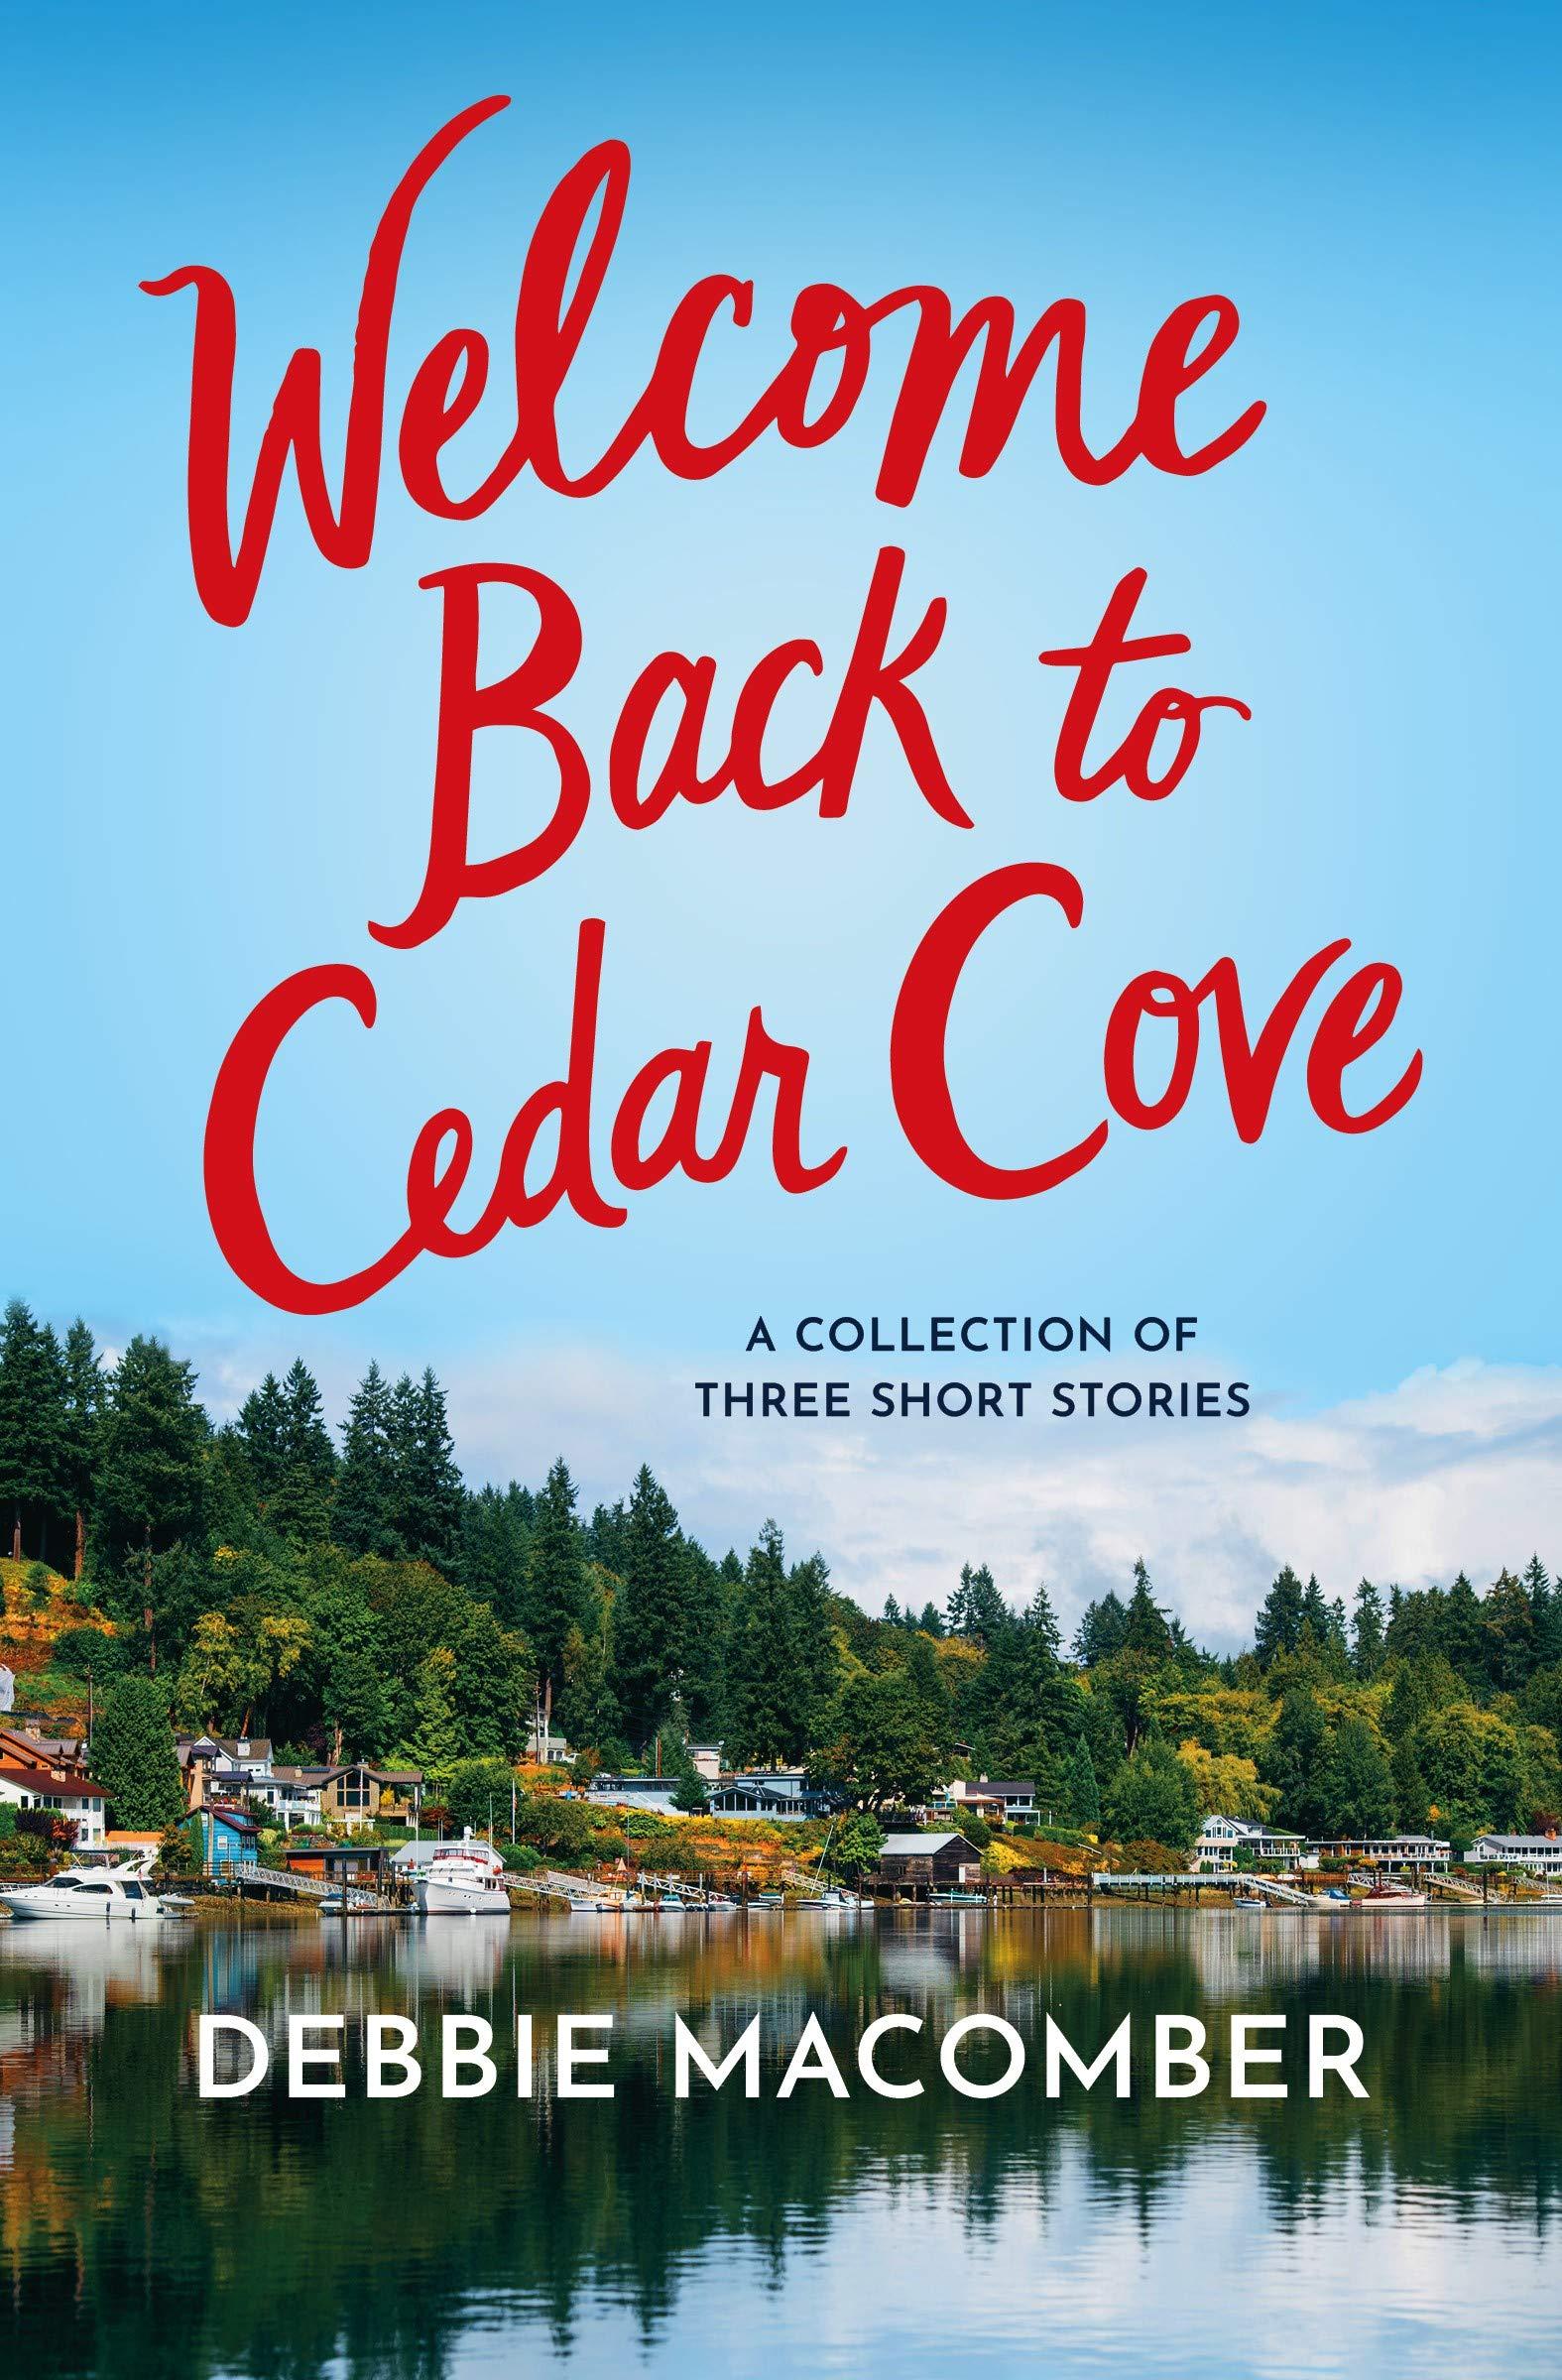 Welcome Back to Cedar Cove: A Collection of Debbie Macomber Short Stories